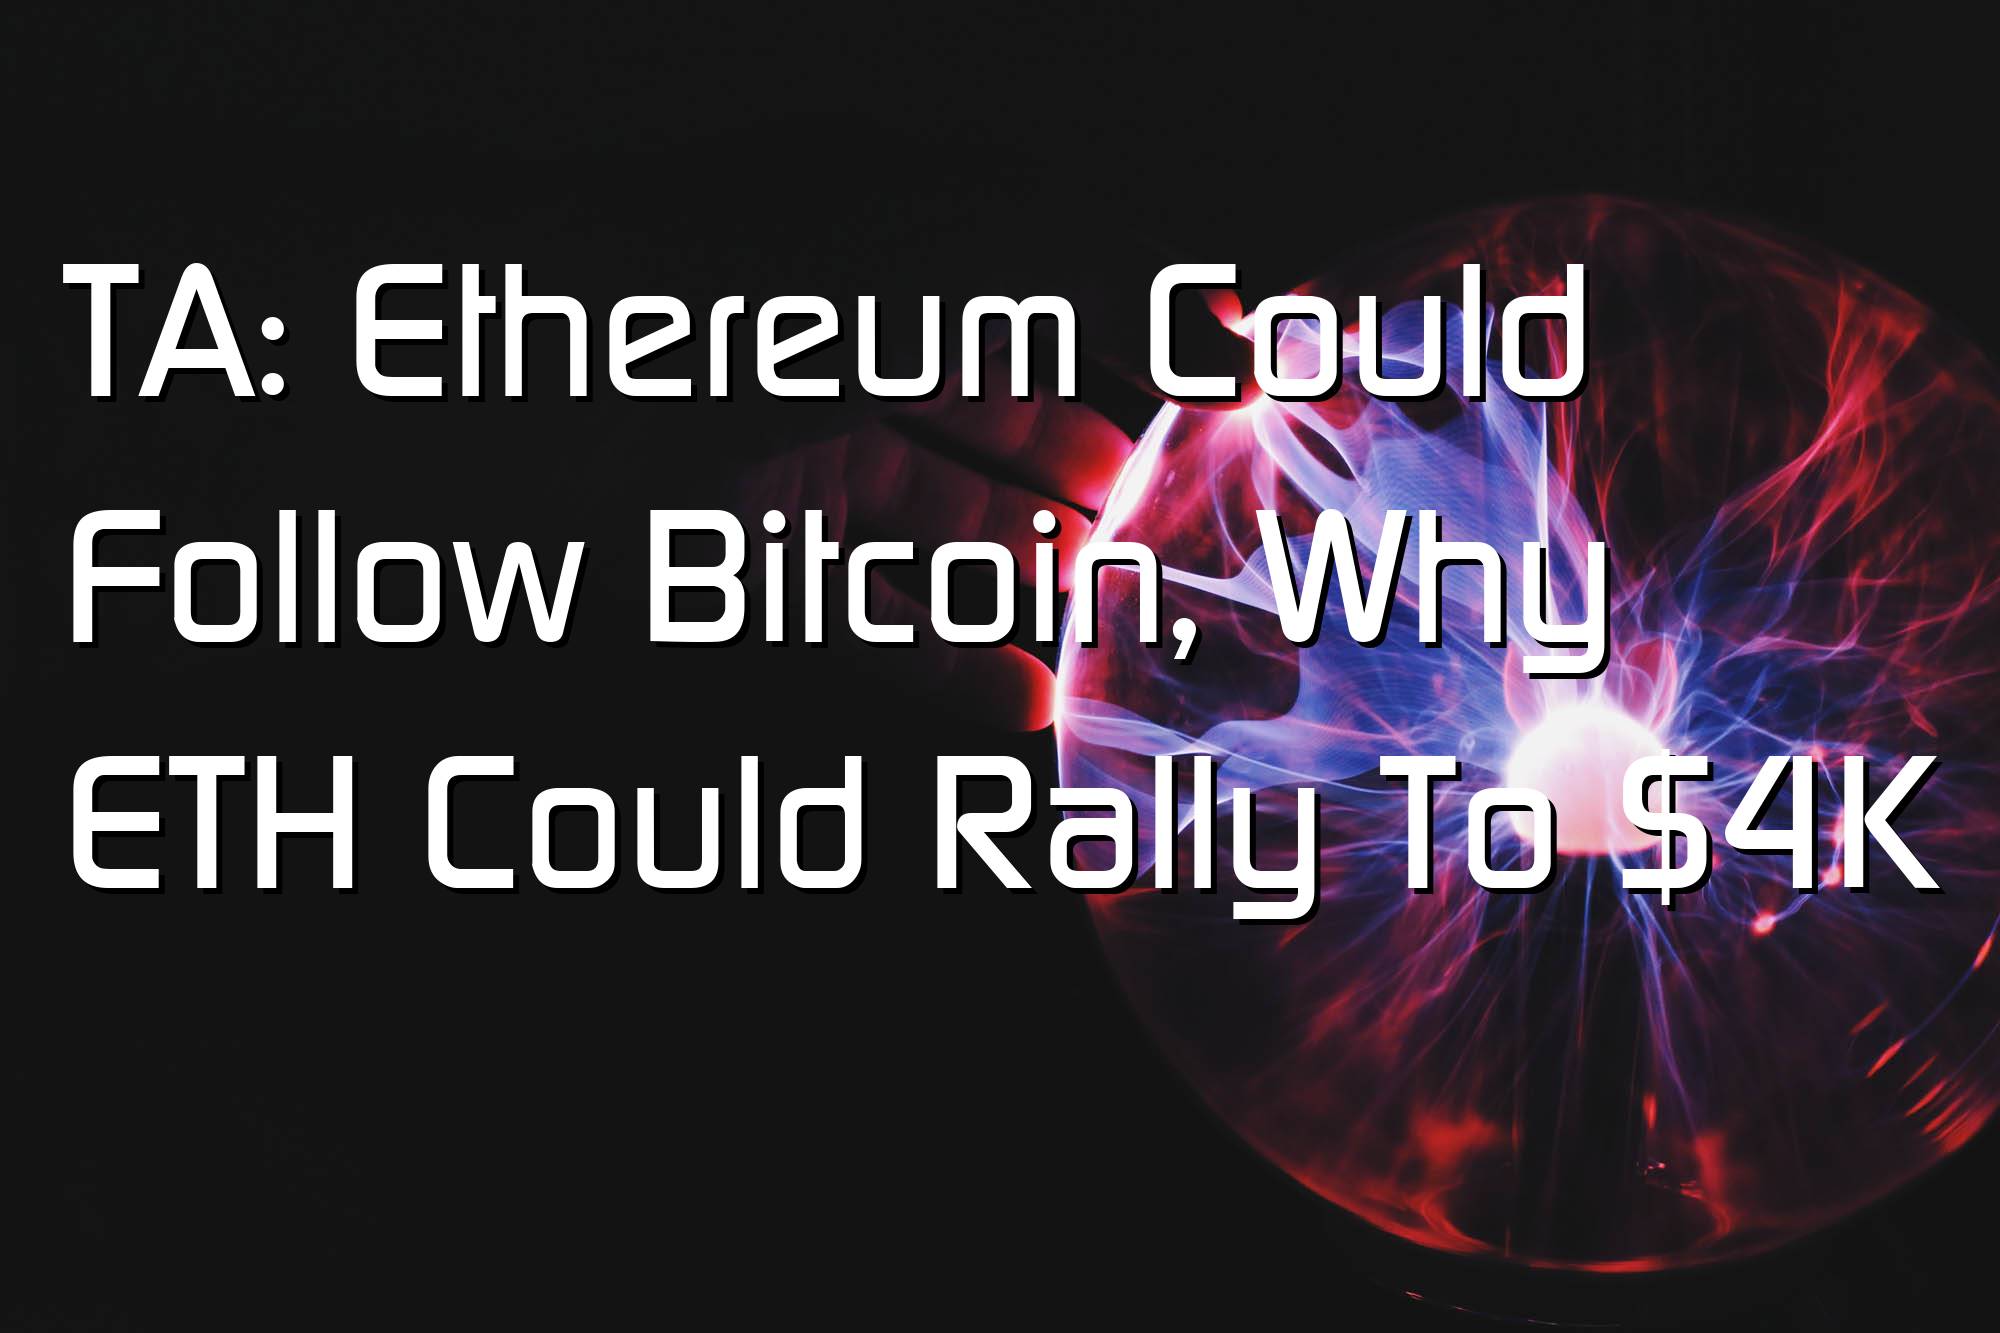 TA: Ethereum Could Follow Bitcoin, Why ETH Could Rally To $4K